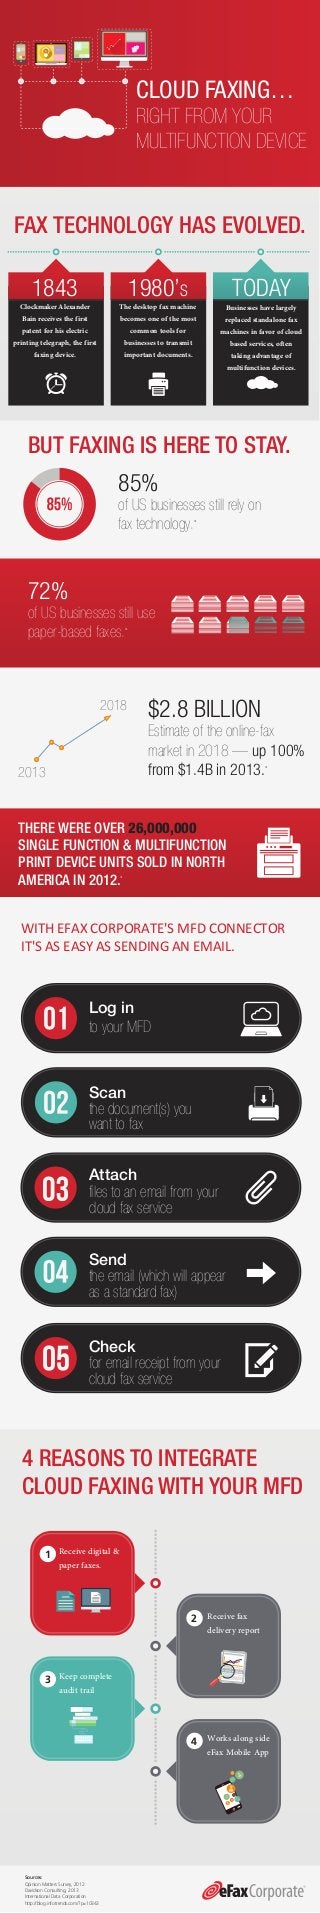 CLOUD FAXING…
RIGHT FROM YOUR
MULTIFUNCTION DEVICE
85%
of US businesses still rely on
fax technology.*
$2.8 BILLION
Estimate of the online-fax
market in 2018 — up 100%
from $1.4B in 2013.*
72%
of US businesses still use
paper-based faxes.*
FAX TECHNOLOGY HAS EVOLVED.
BUT FAXING IS HERE TO STAY.
THERE WERE OVER 26,000,000
SINGLE FUNCTION & MULTIFUNCTION
PRINT DEVICE UNITS SOLD IN NORTH
AMERICA IN 2012.*
WITH EFAX CORPORATE'S MFD CONNECTOR
IT'S AS EASY AS SENDING AN EMAIL.
4 REASONS TO INTEGRATE
CLOUD FAXING WITH YOUR MFD
2018
2013
1843
Clockmaker Alexander
Bain receives the first
patent for his electric
printing telegraph, the first
faxing device.
1980’S
The desktop fax machine
becomes one of the most
common tools for
businesses to transmit
important documents.
TODAY
Businesses have largely
replaced standalone fax
machines in favor of cloud
based services, often
taking advantage of
multifunction devices.
Works along side
eFax Mobile App
1
Receive fax
delivery report
3
Receive digital &
paper faxes.
2
Keep complete
audit trail
4
Send
the email (which will appear
as a standard fax)
Attach
files to an email from your
cloud fax service
Check
for email receipt from your
cloud fax service
Scan
the document(s) you
want to fax
Log in
to your MFD
Sources:
Opinion Matters Survey, 2012
Davidson Consulting, 2013
International Data Corporation
http://blog.infotrends.com/?p=10343
 